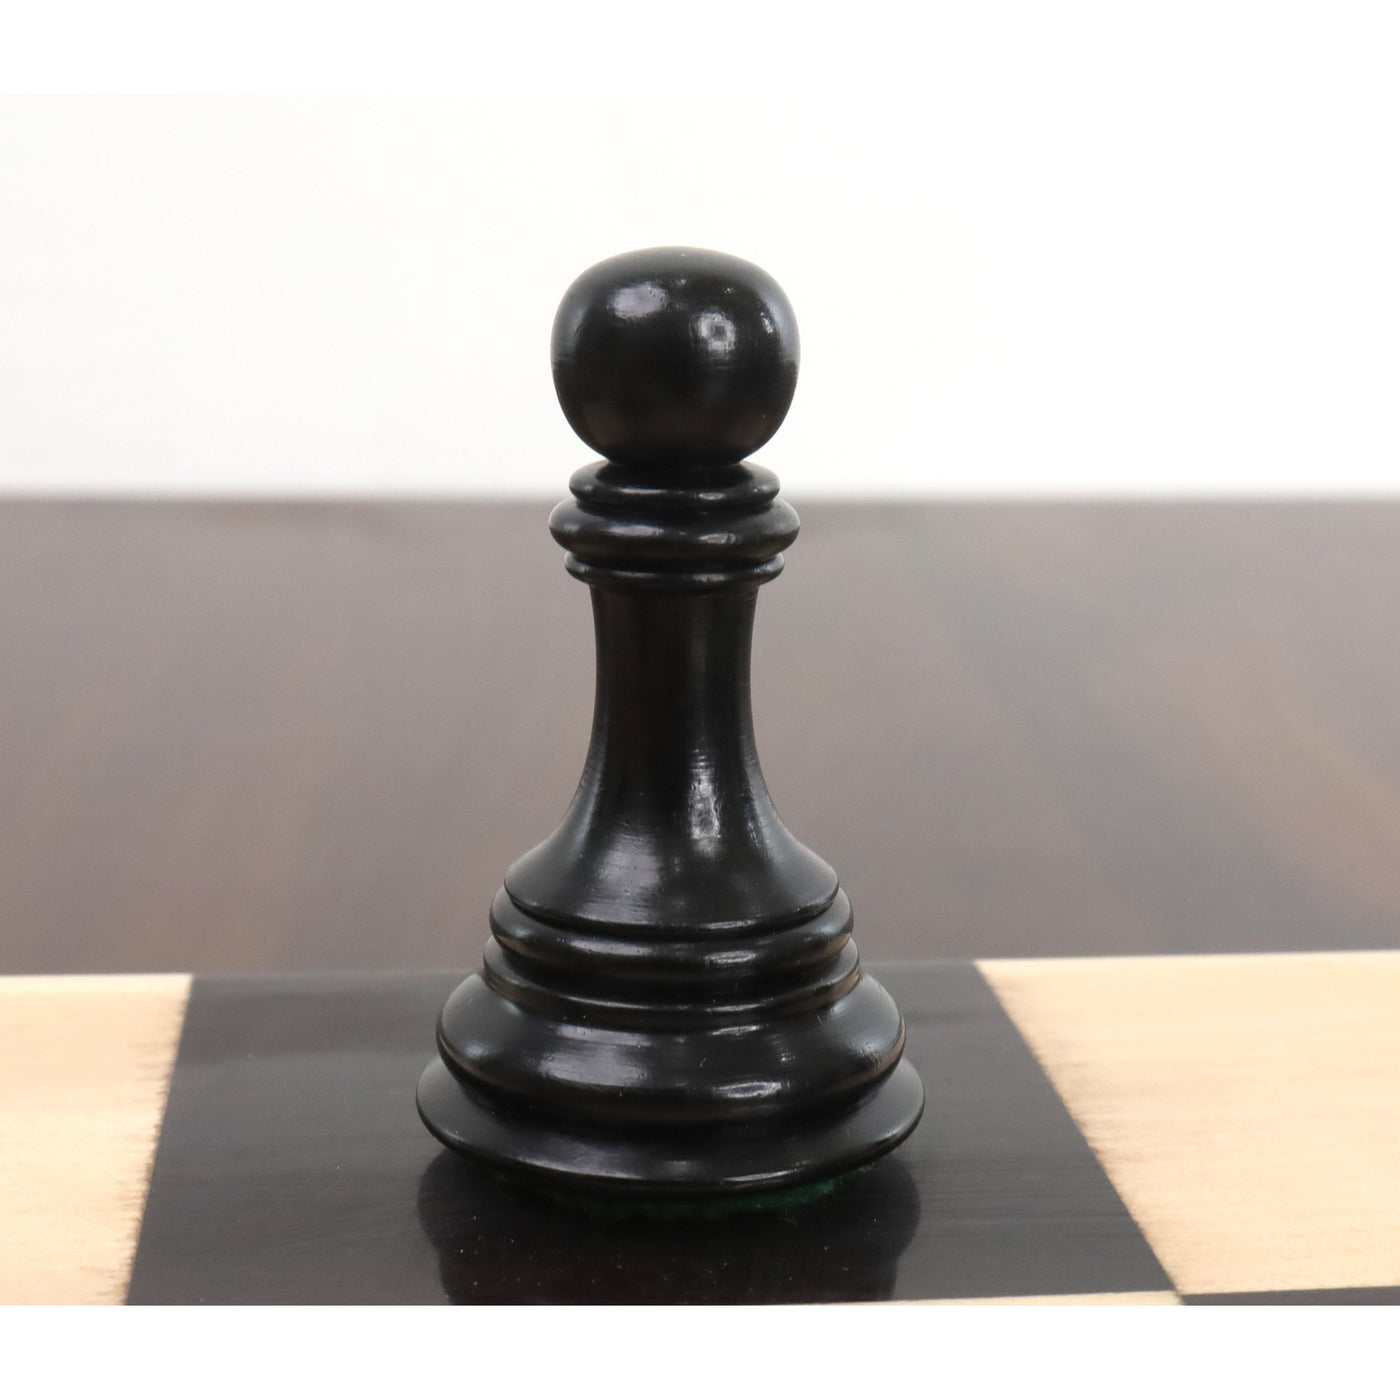 3.9" New Columbian Staunton Chess Set - Chess Pieces Only - Ebony Wood - Triple Weighted